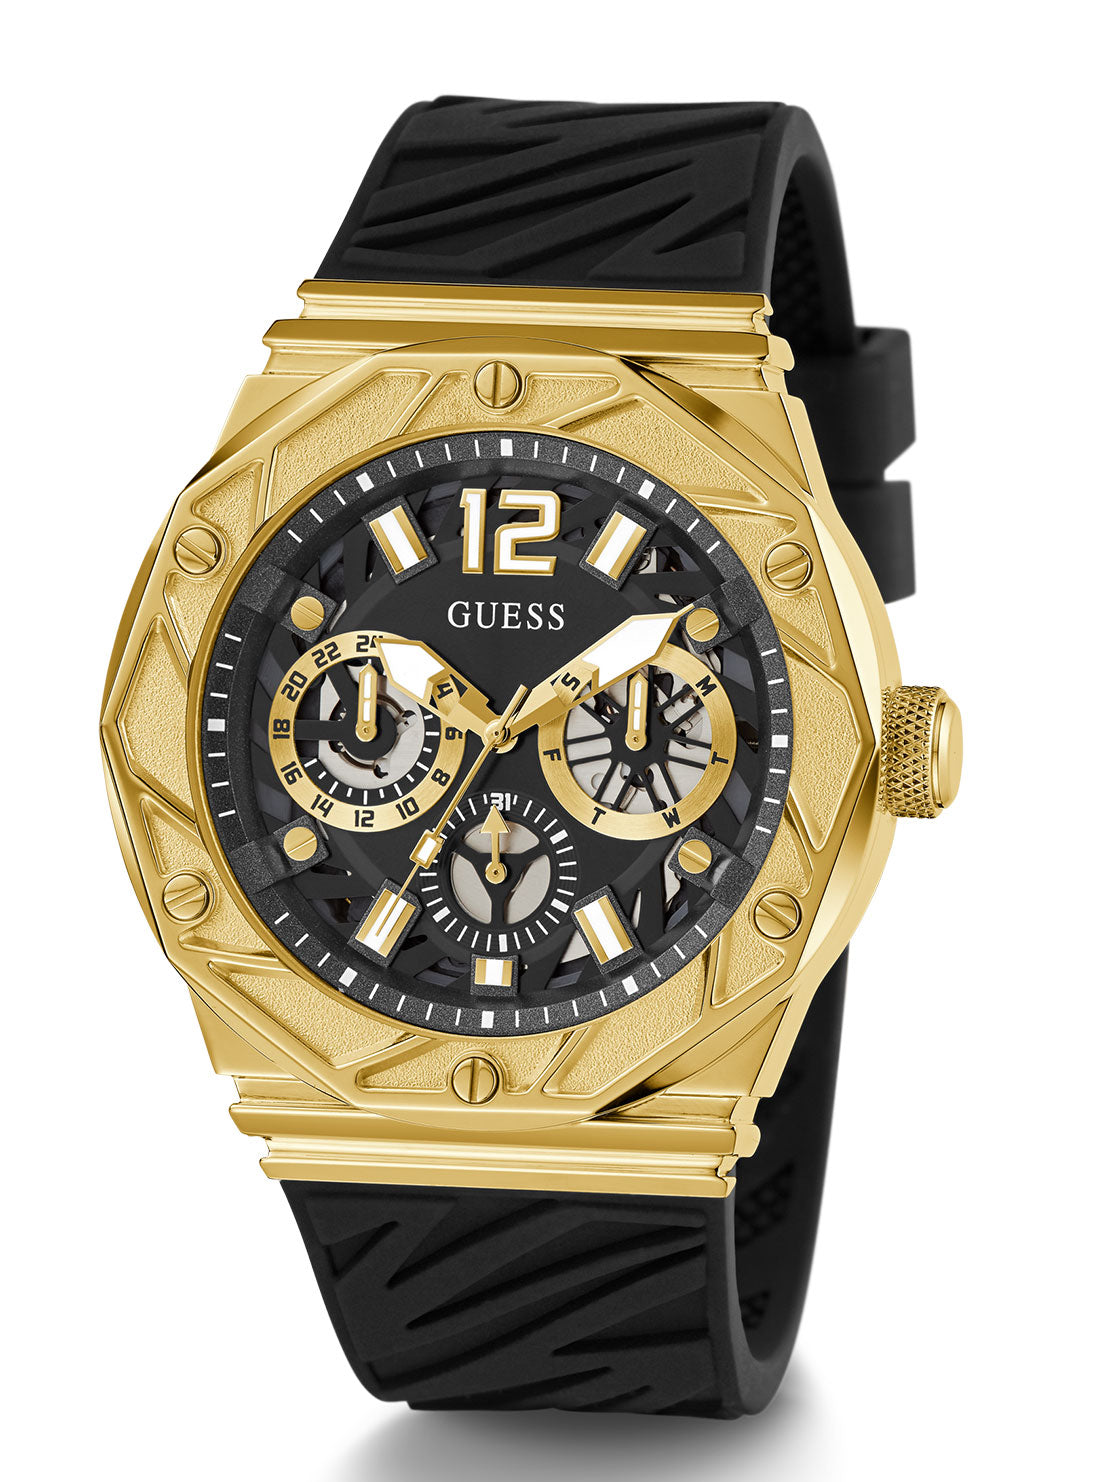 GUESS Men's Black Gold Rival Silicone Watch GW0634G2 Full View